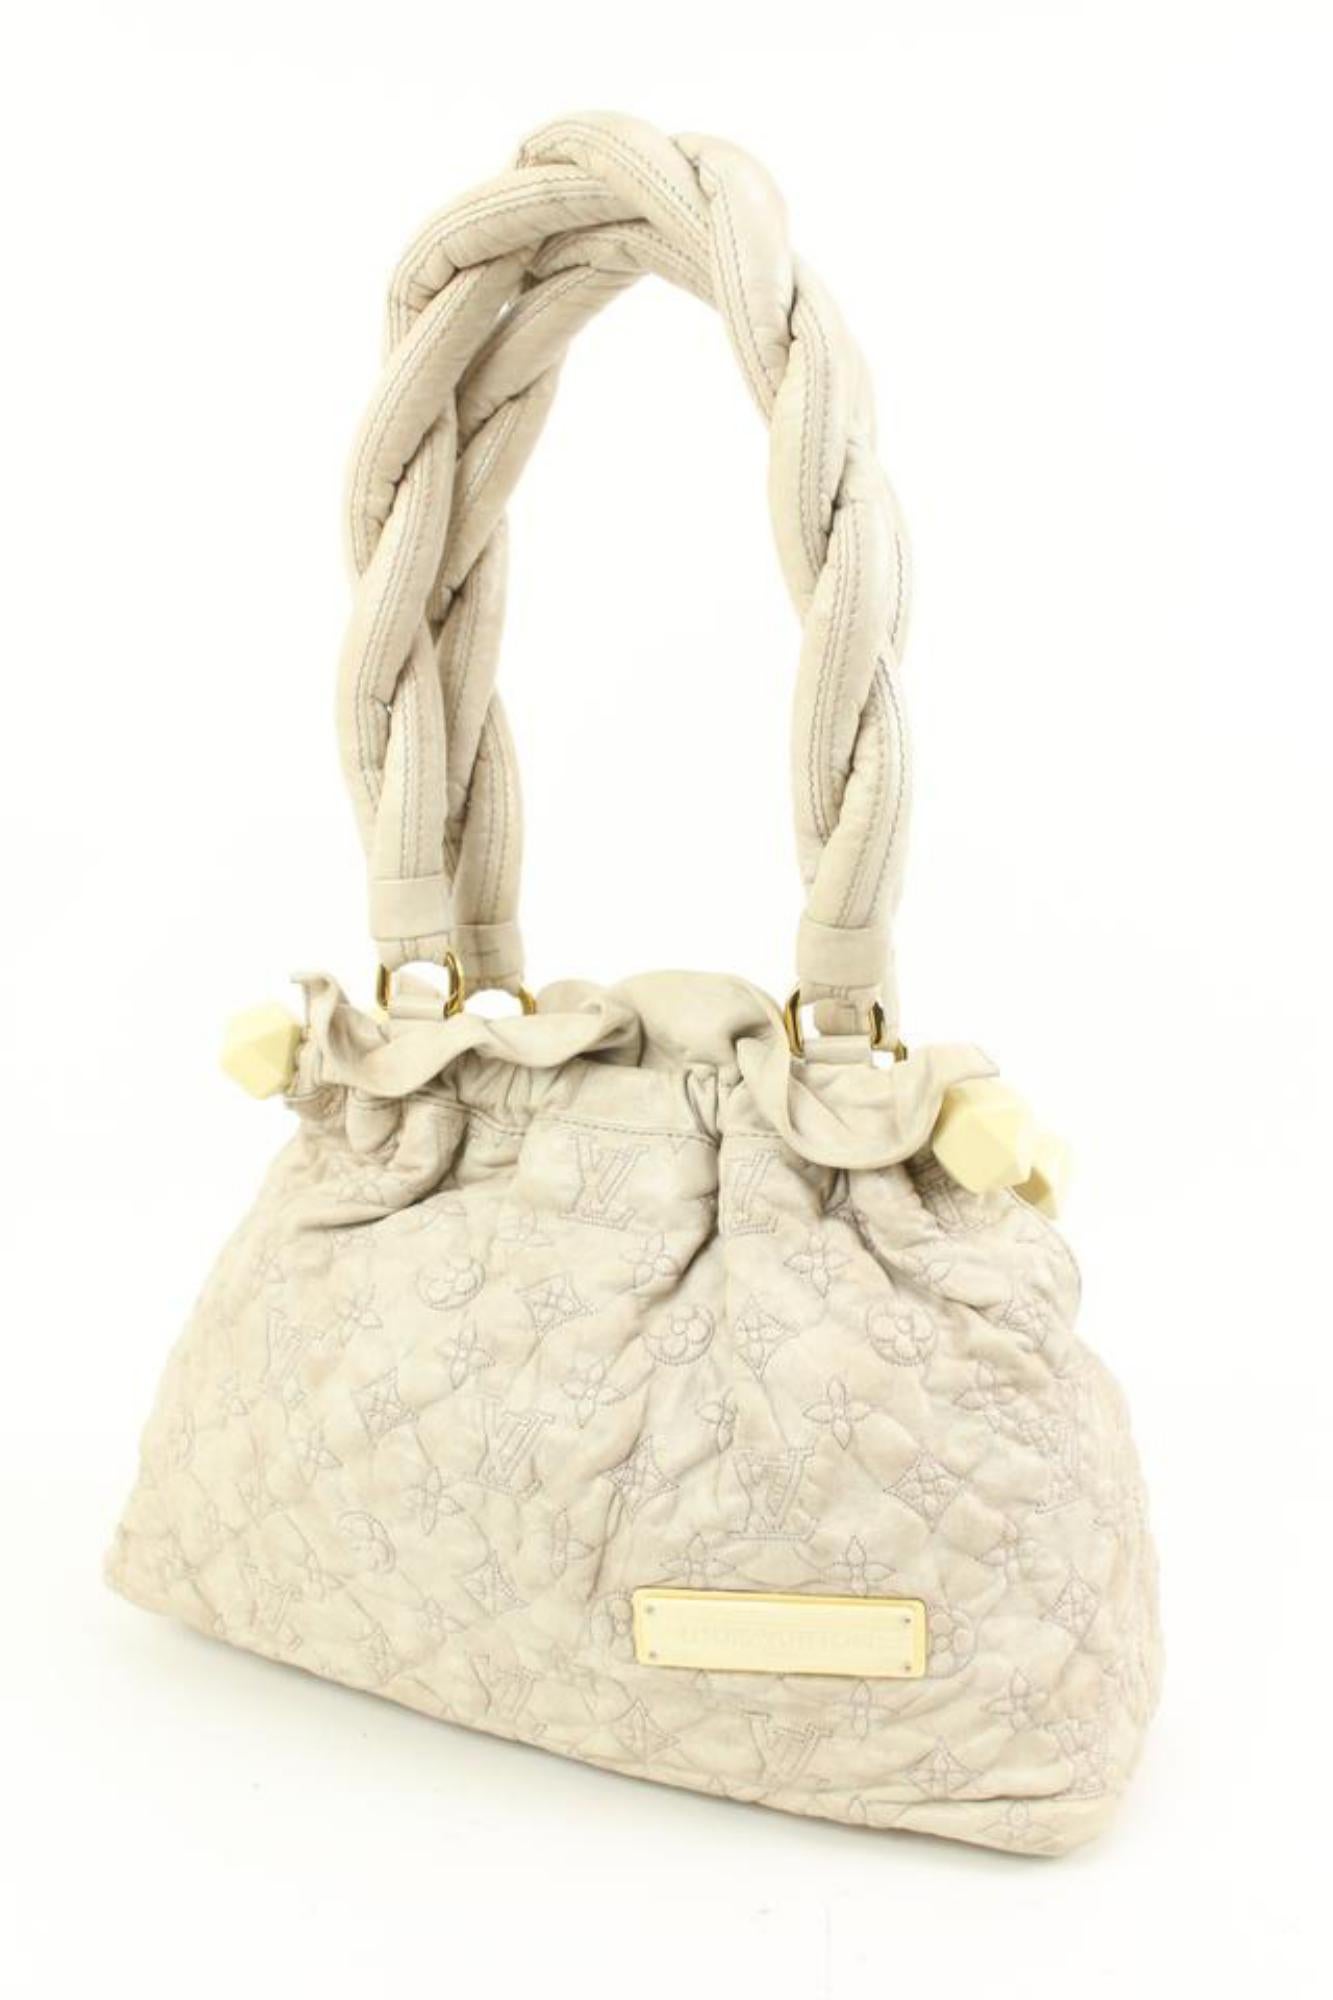 Louis Vuitton Limited Edition Beige Monogram Stratus Olympe PM Hobo Bag 8lz419s
Date Code/Serial Number: RC0037
Made In: Italy
Measurements: Length:  14.5